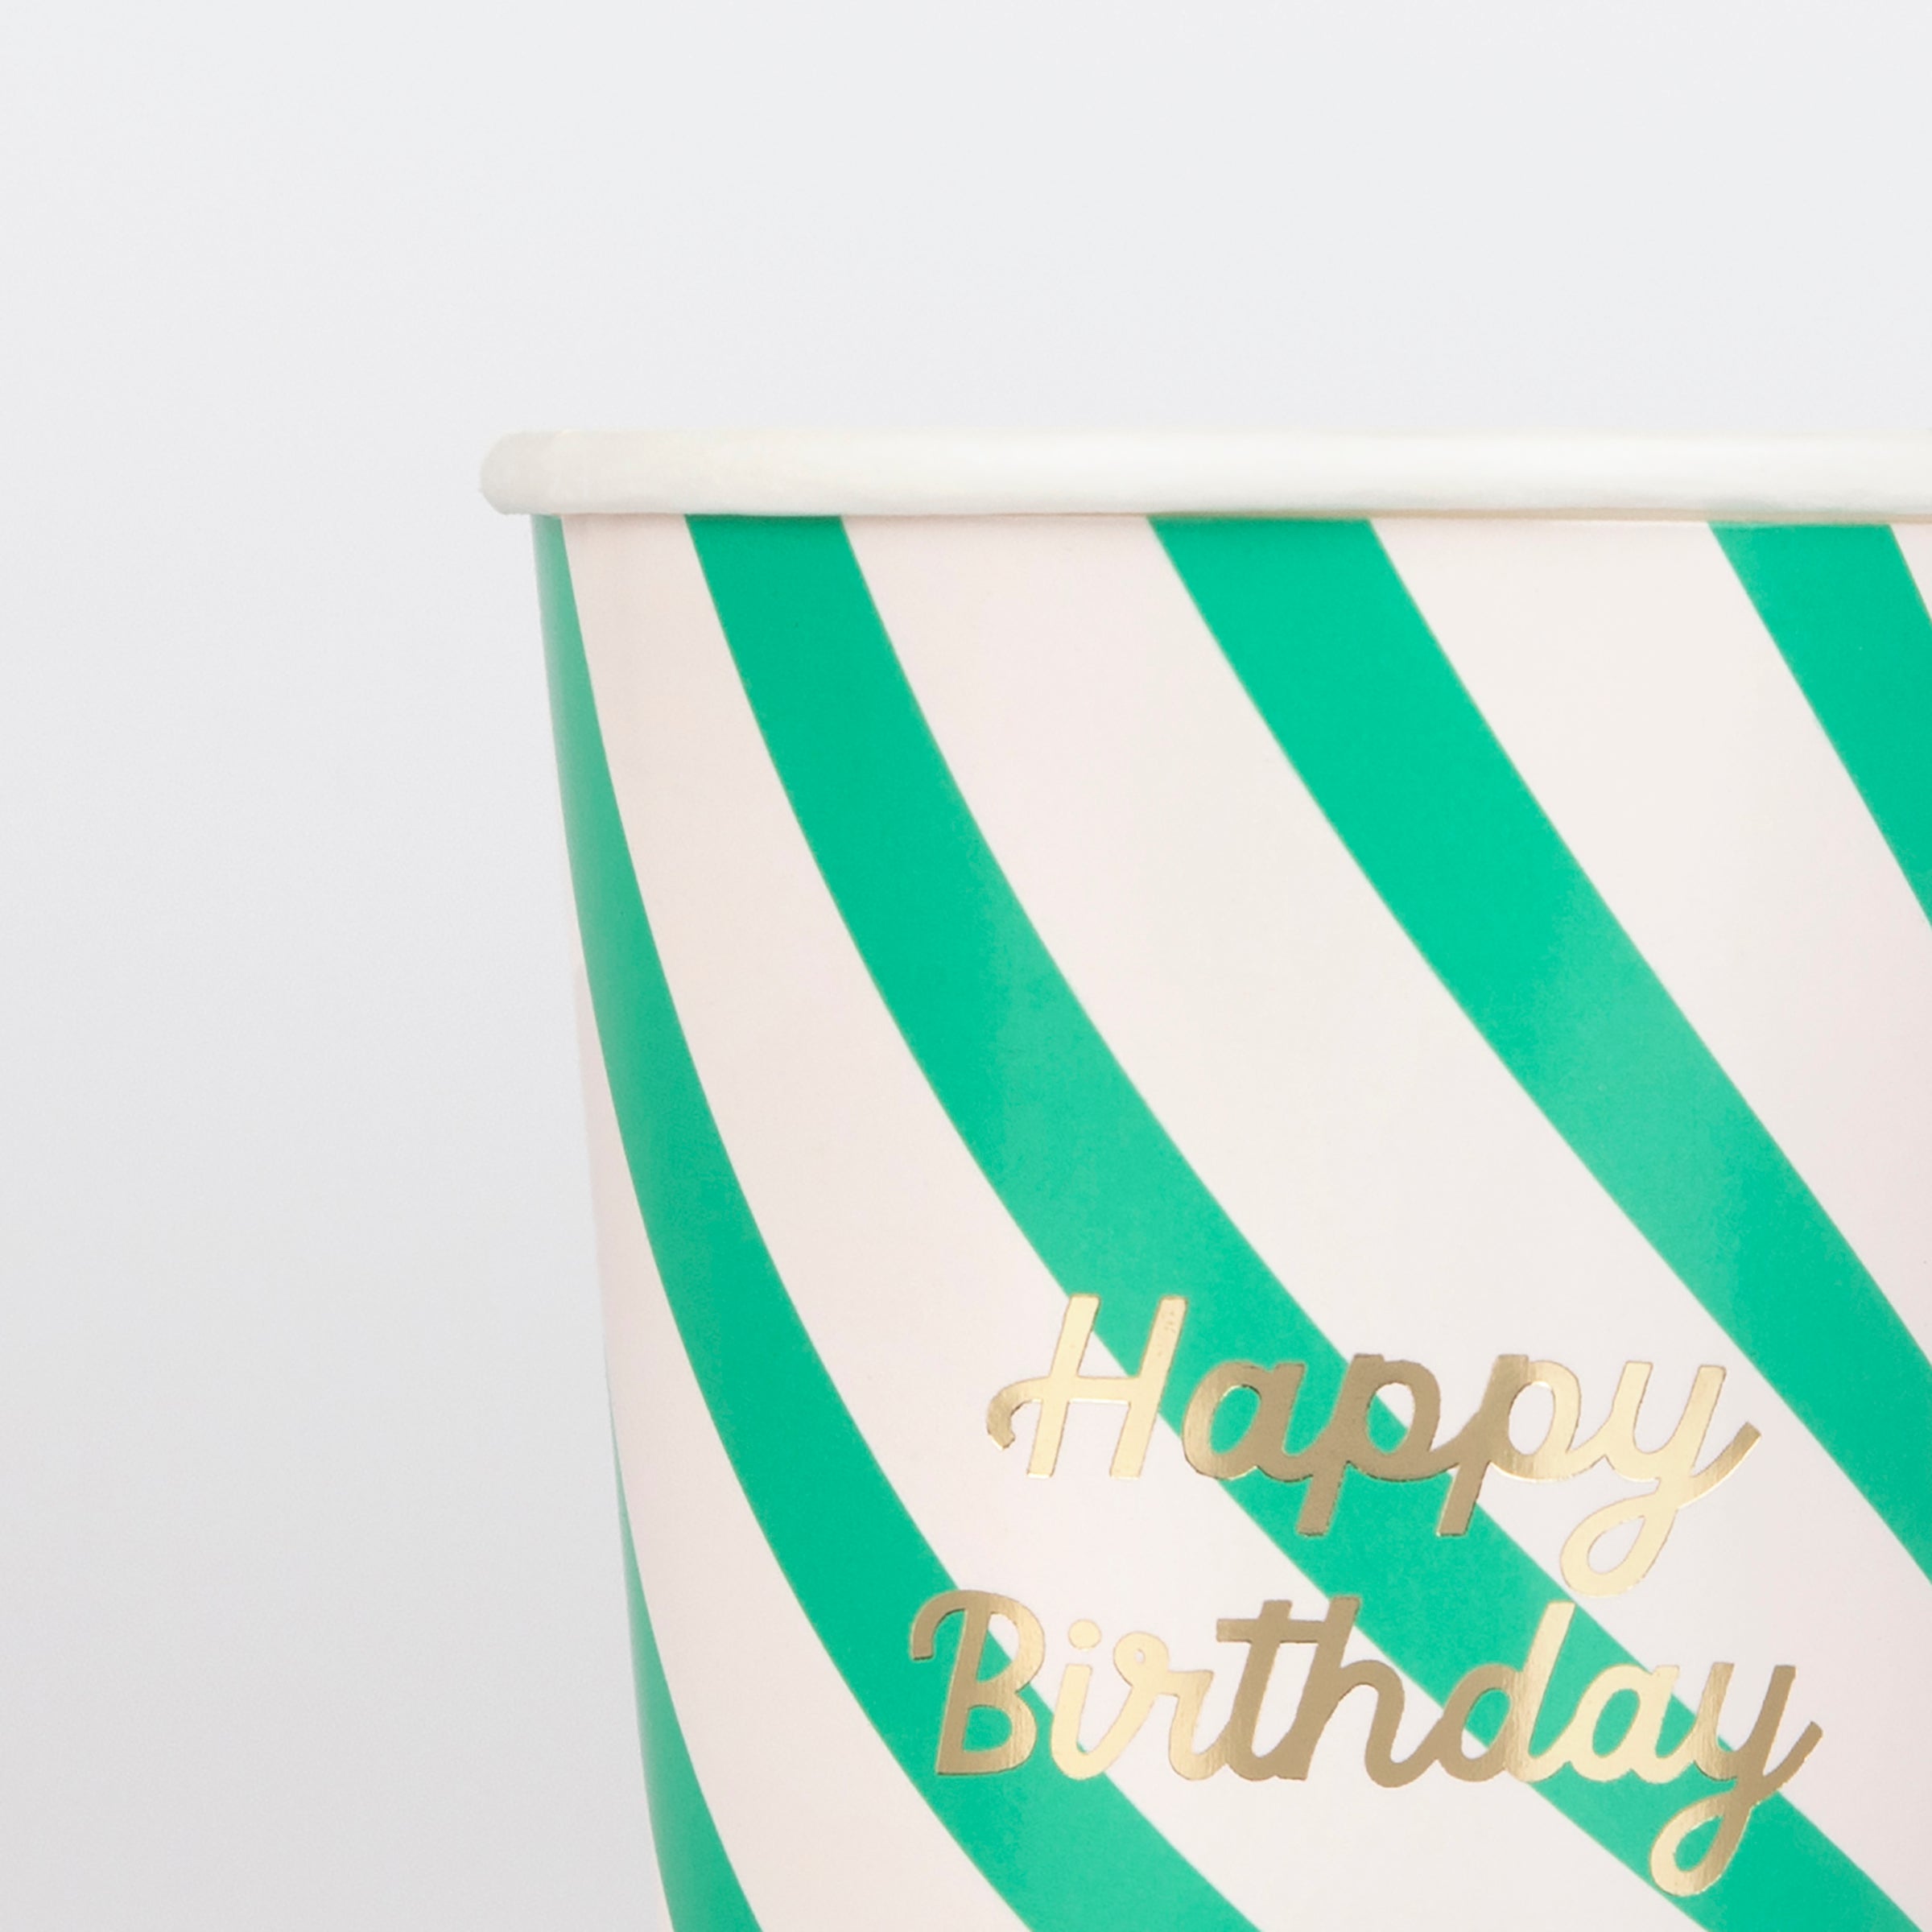 Our birthday cups look amazing with bright stripes of color and shiny gold foil details.